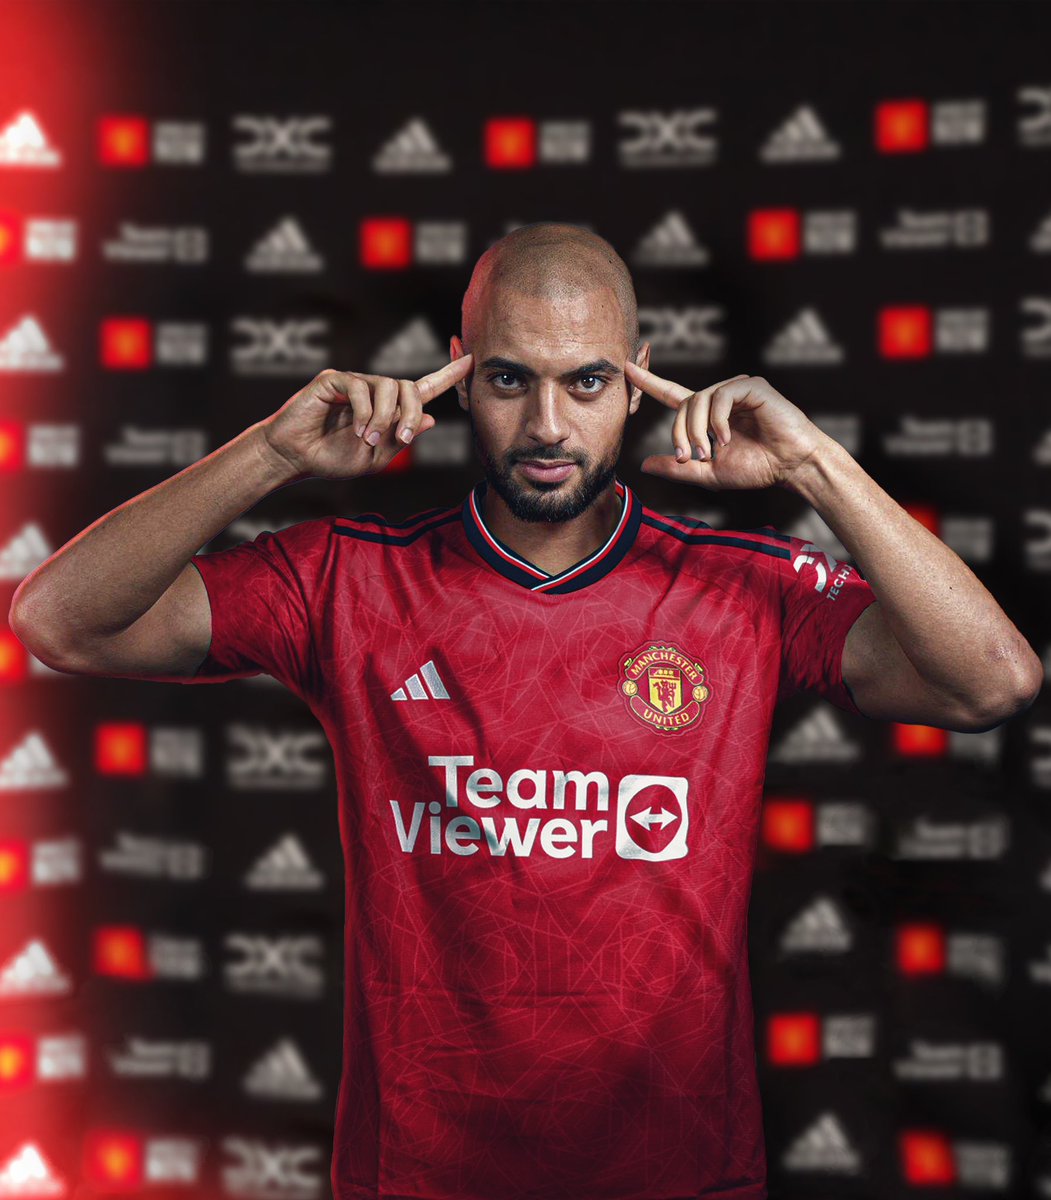 Sofyan Amrabat, new Manchester Utd player as revealed earlier — here we go confirmed 🔴🇲🇦 #MUFC Loan deal on €10m fee plus buy clause for June 2024 worth €20m plus €5m add-ons if Man United want Sofyan to stay on long term. On his way to Manchester shortly 🧨✨